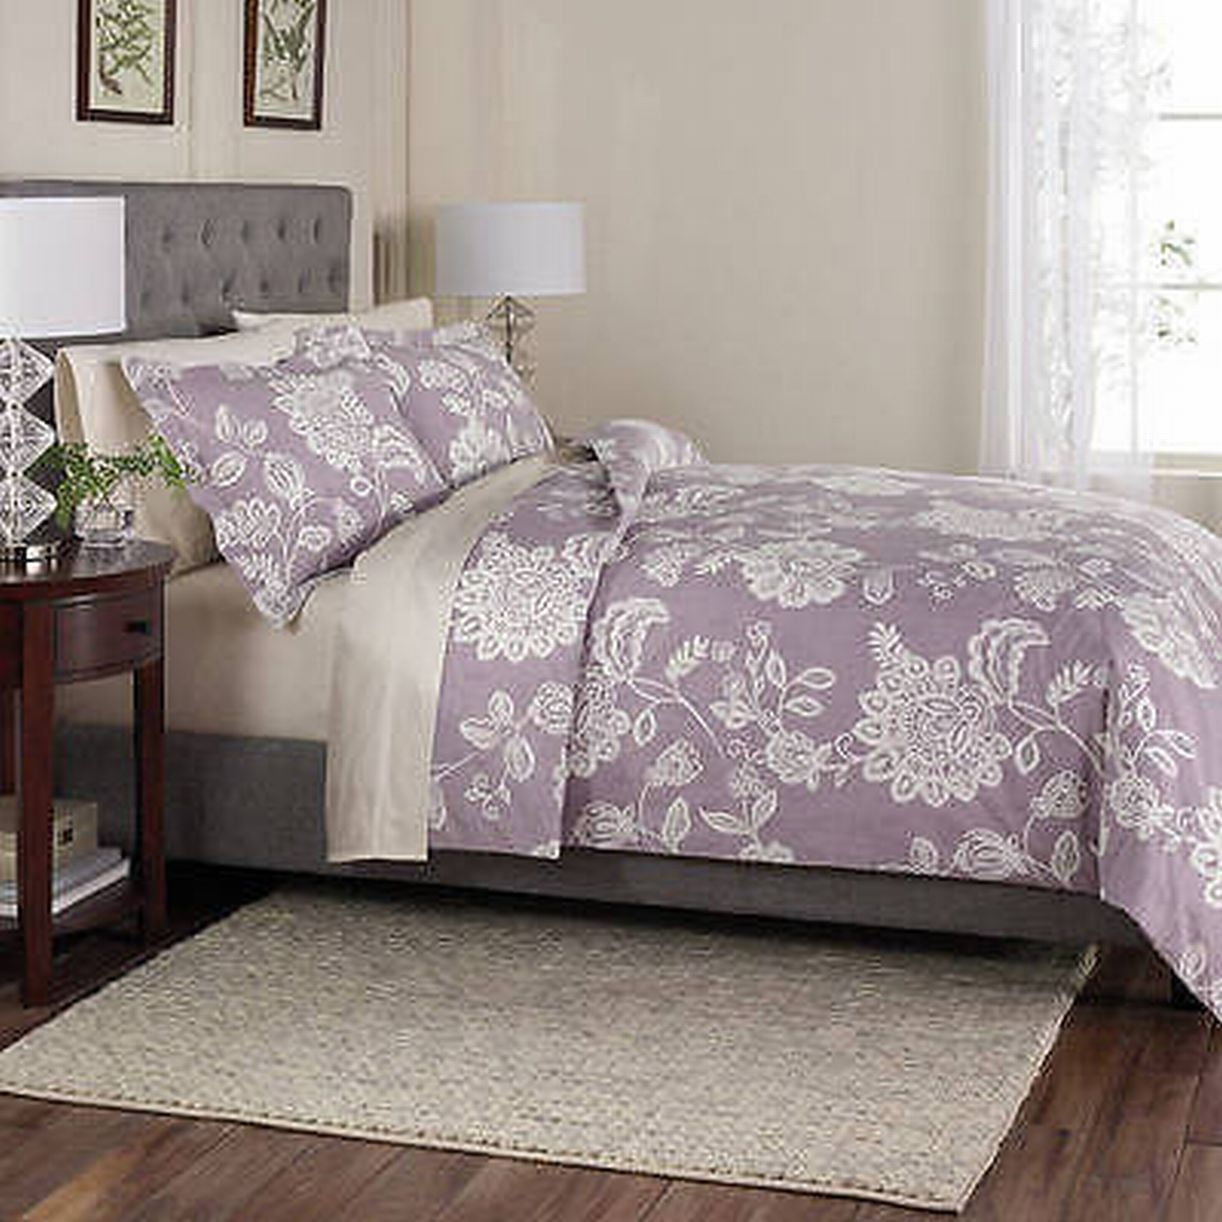 king size comforter covers